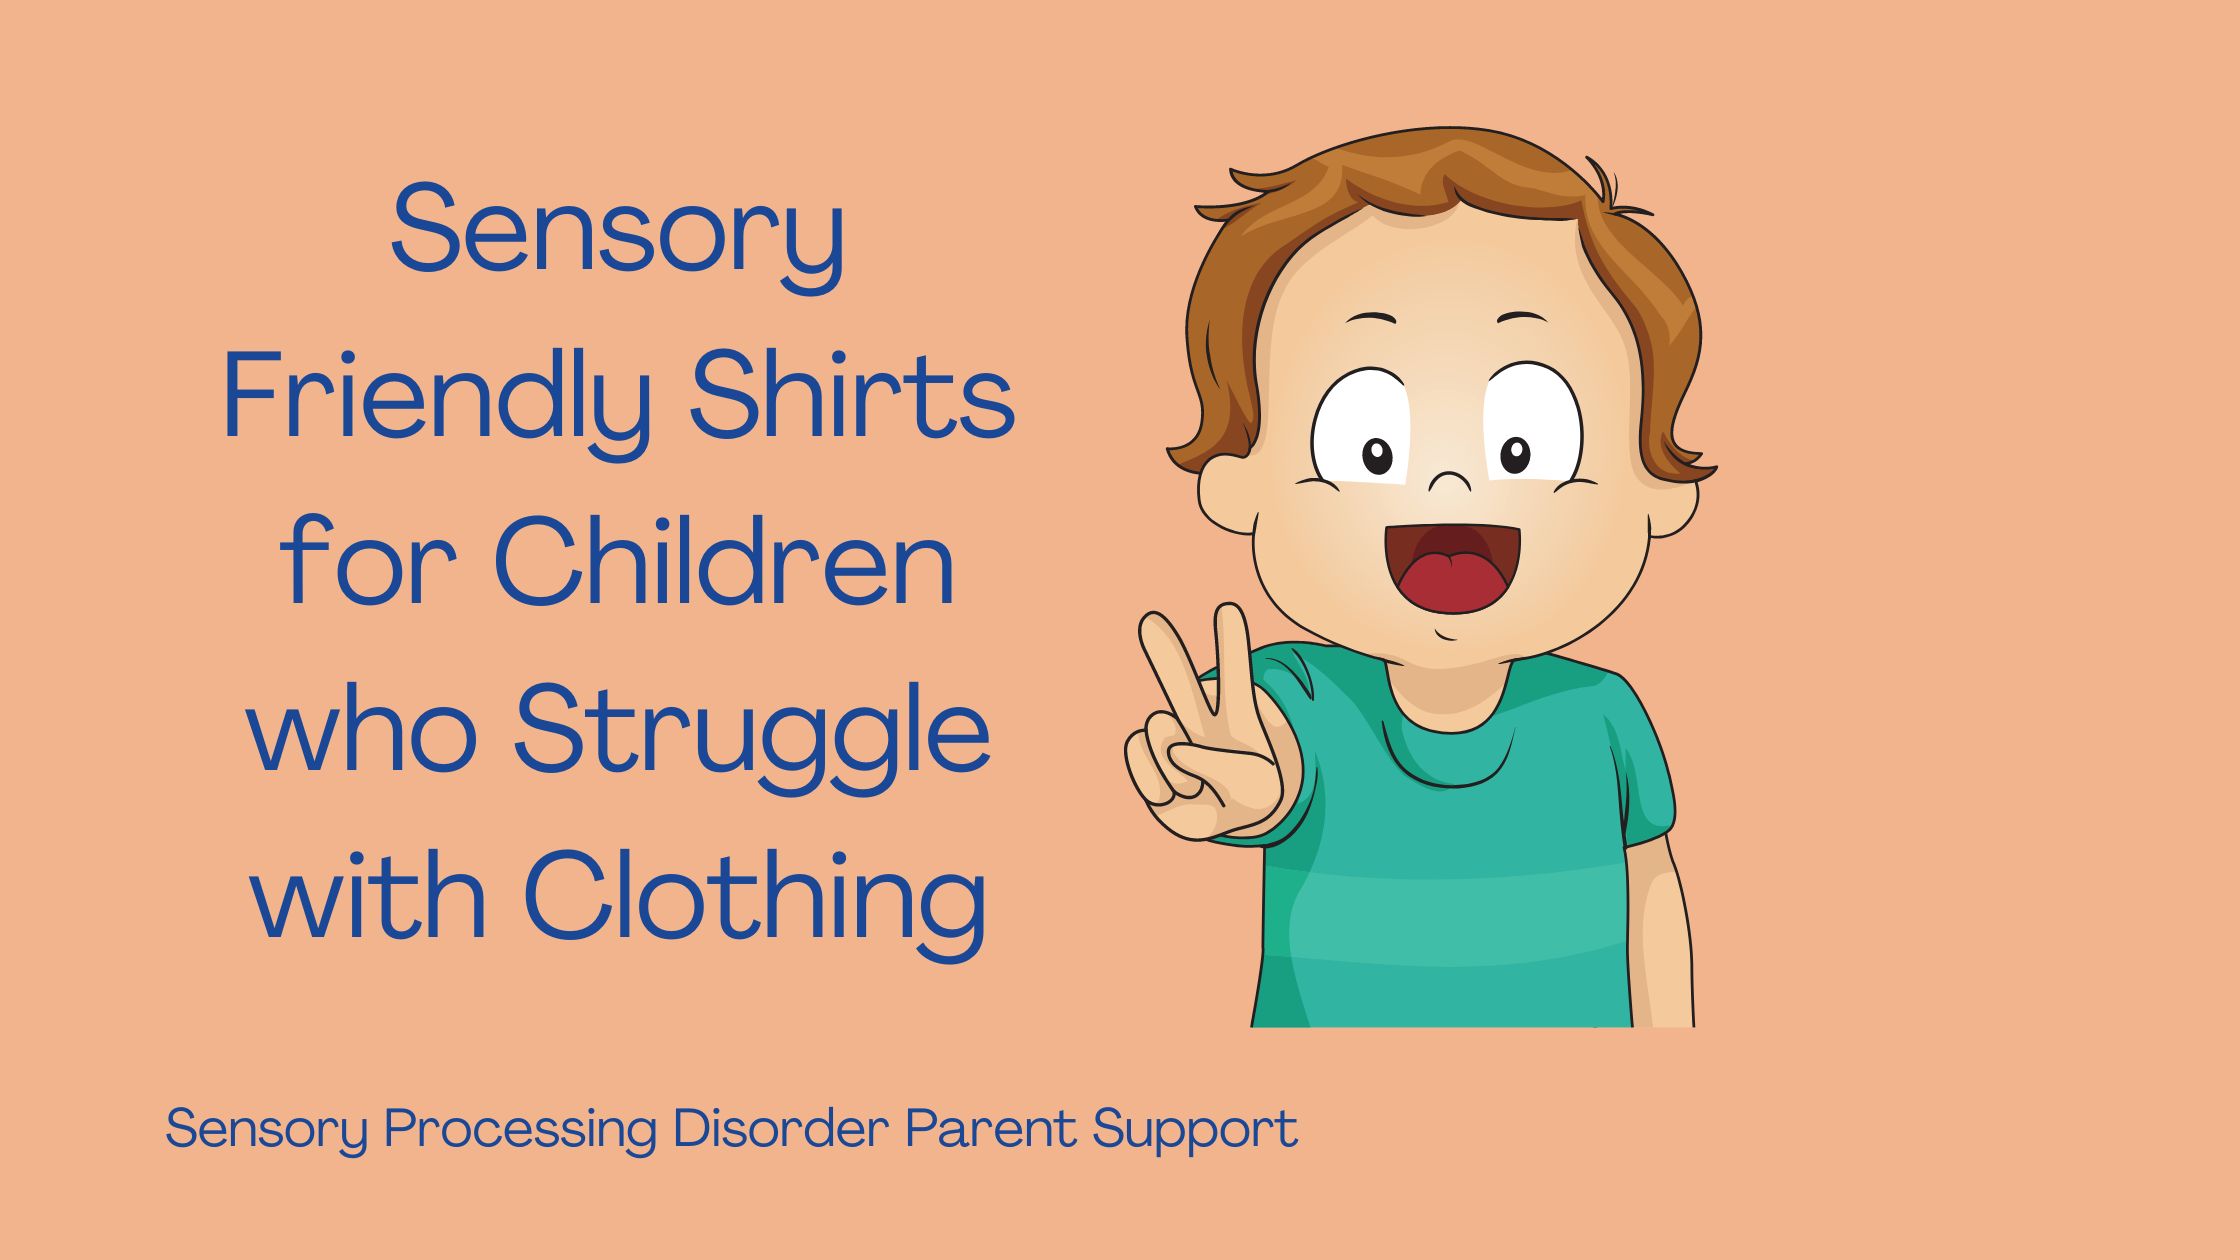 child with sensory processing disorder wearing a sensory friendly shirt Sensory Friendly Shirts for Children who Struggle with Clothing